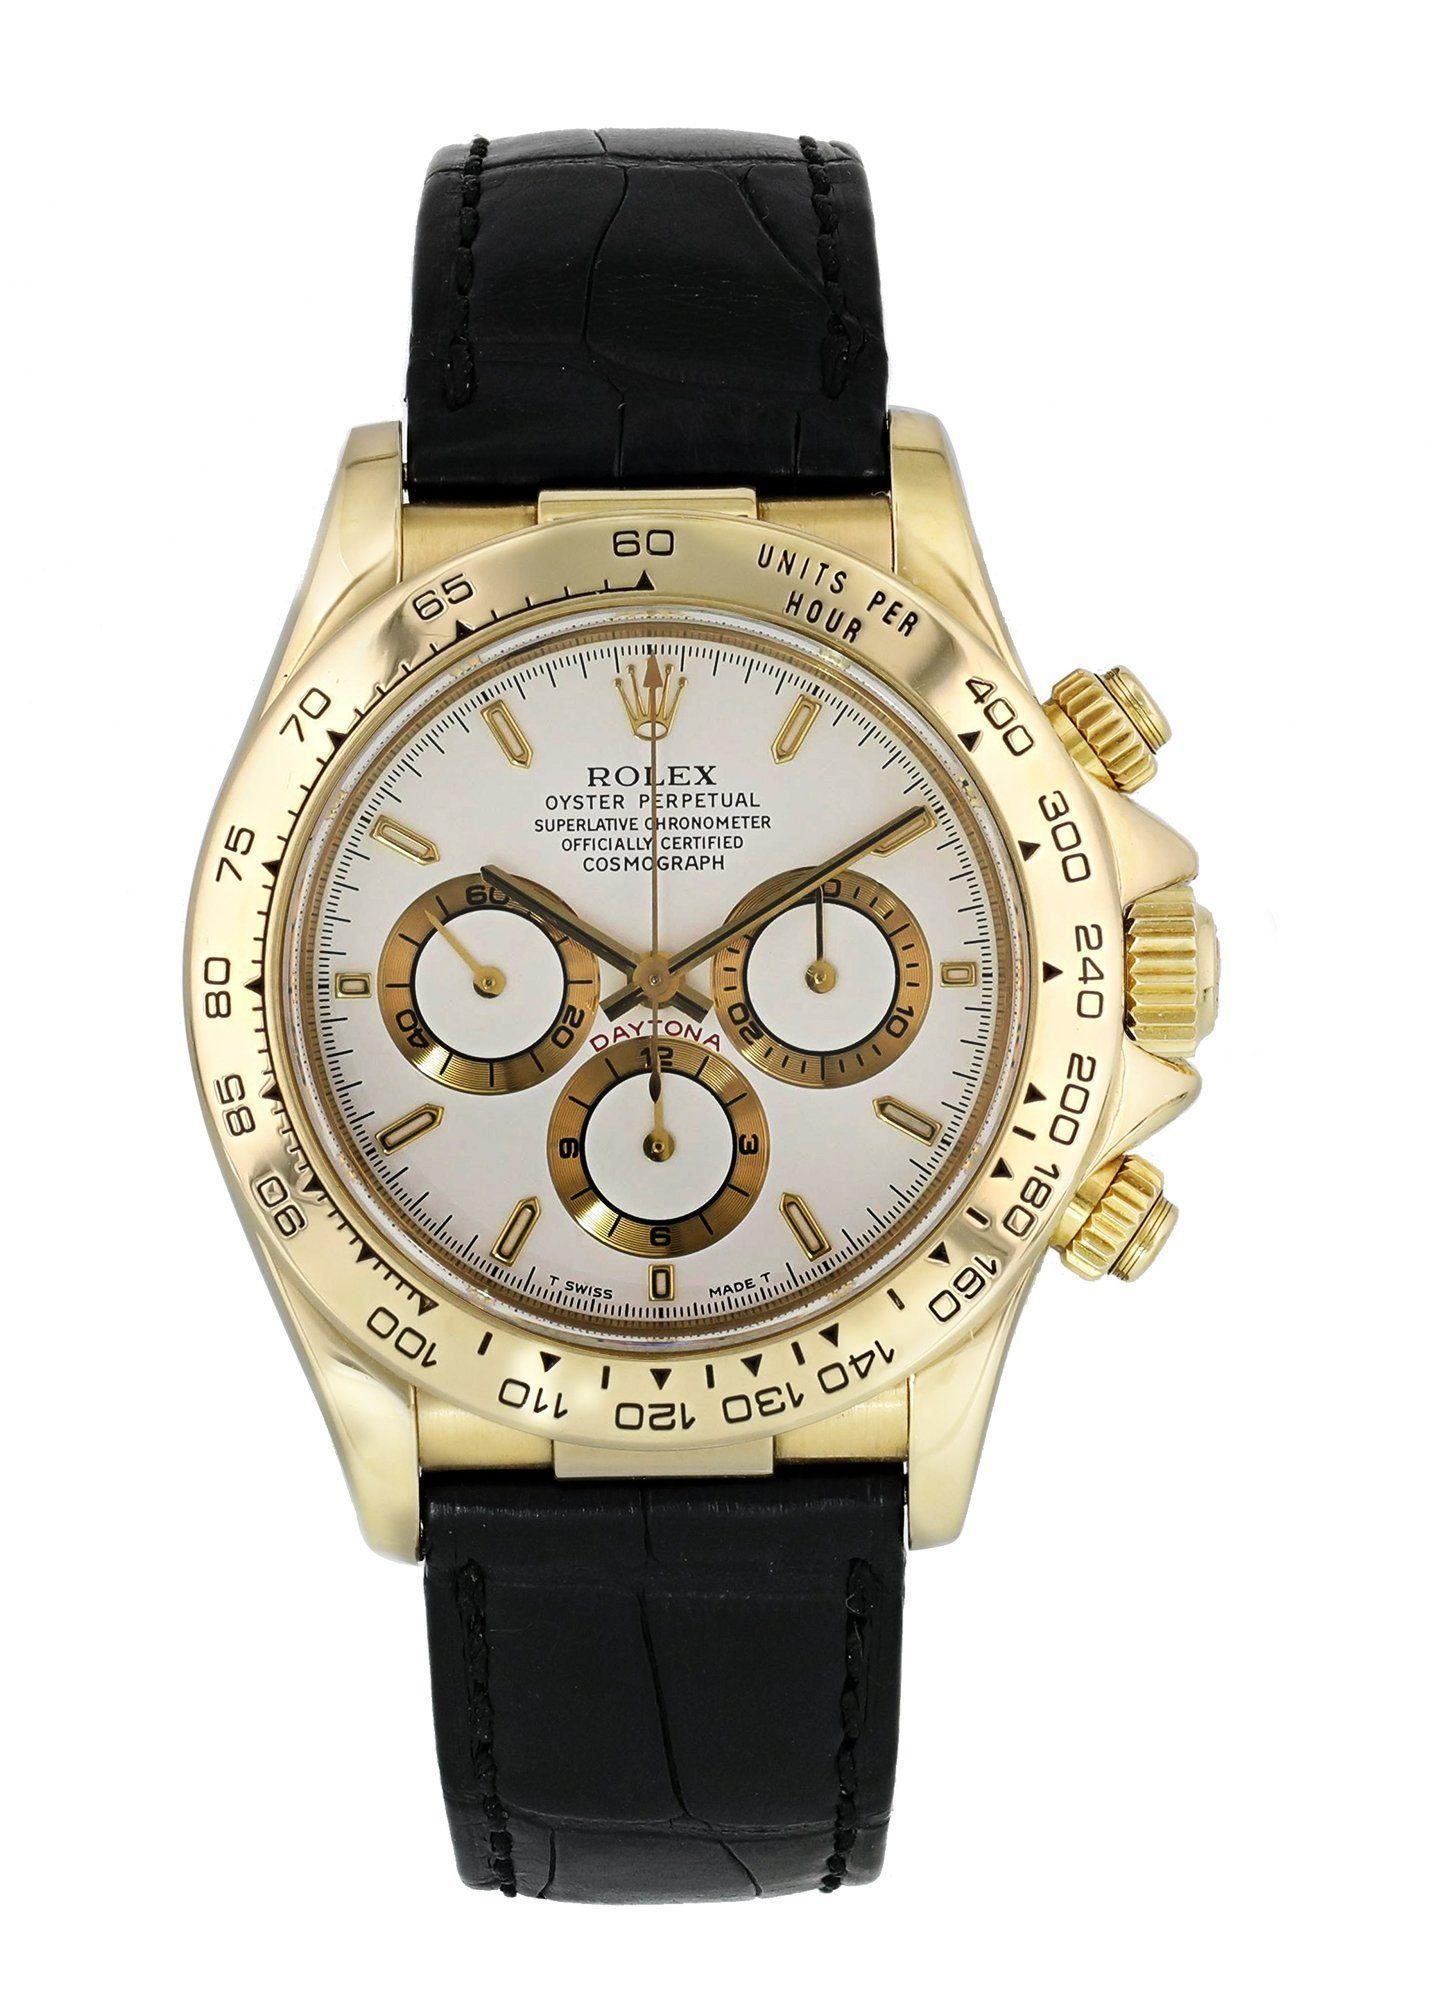 Rolex Daytona 16518 Zenith Men Watch. 
40mm 18k Yellow Gold case. 
Yellow Gold Stationary bezel. 
White dial with Luminous gold hands and index hour markers. 
Minute markers on the outer dial. 
Alligator leather strap with Fold Over Clasp. 
Will fit